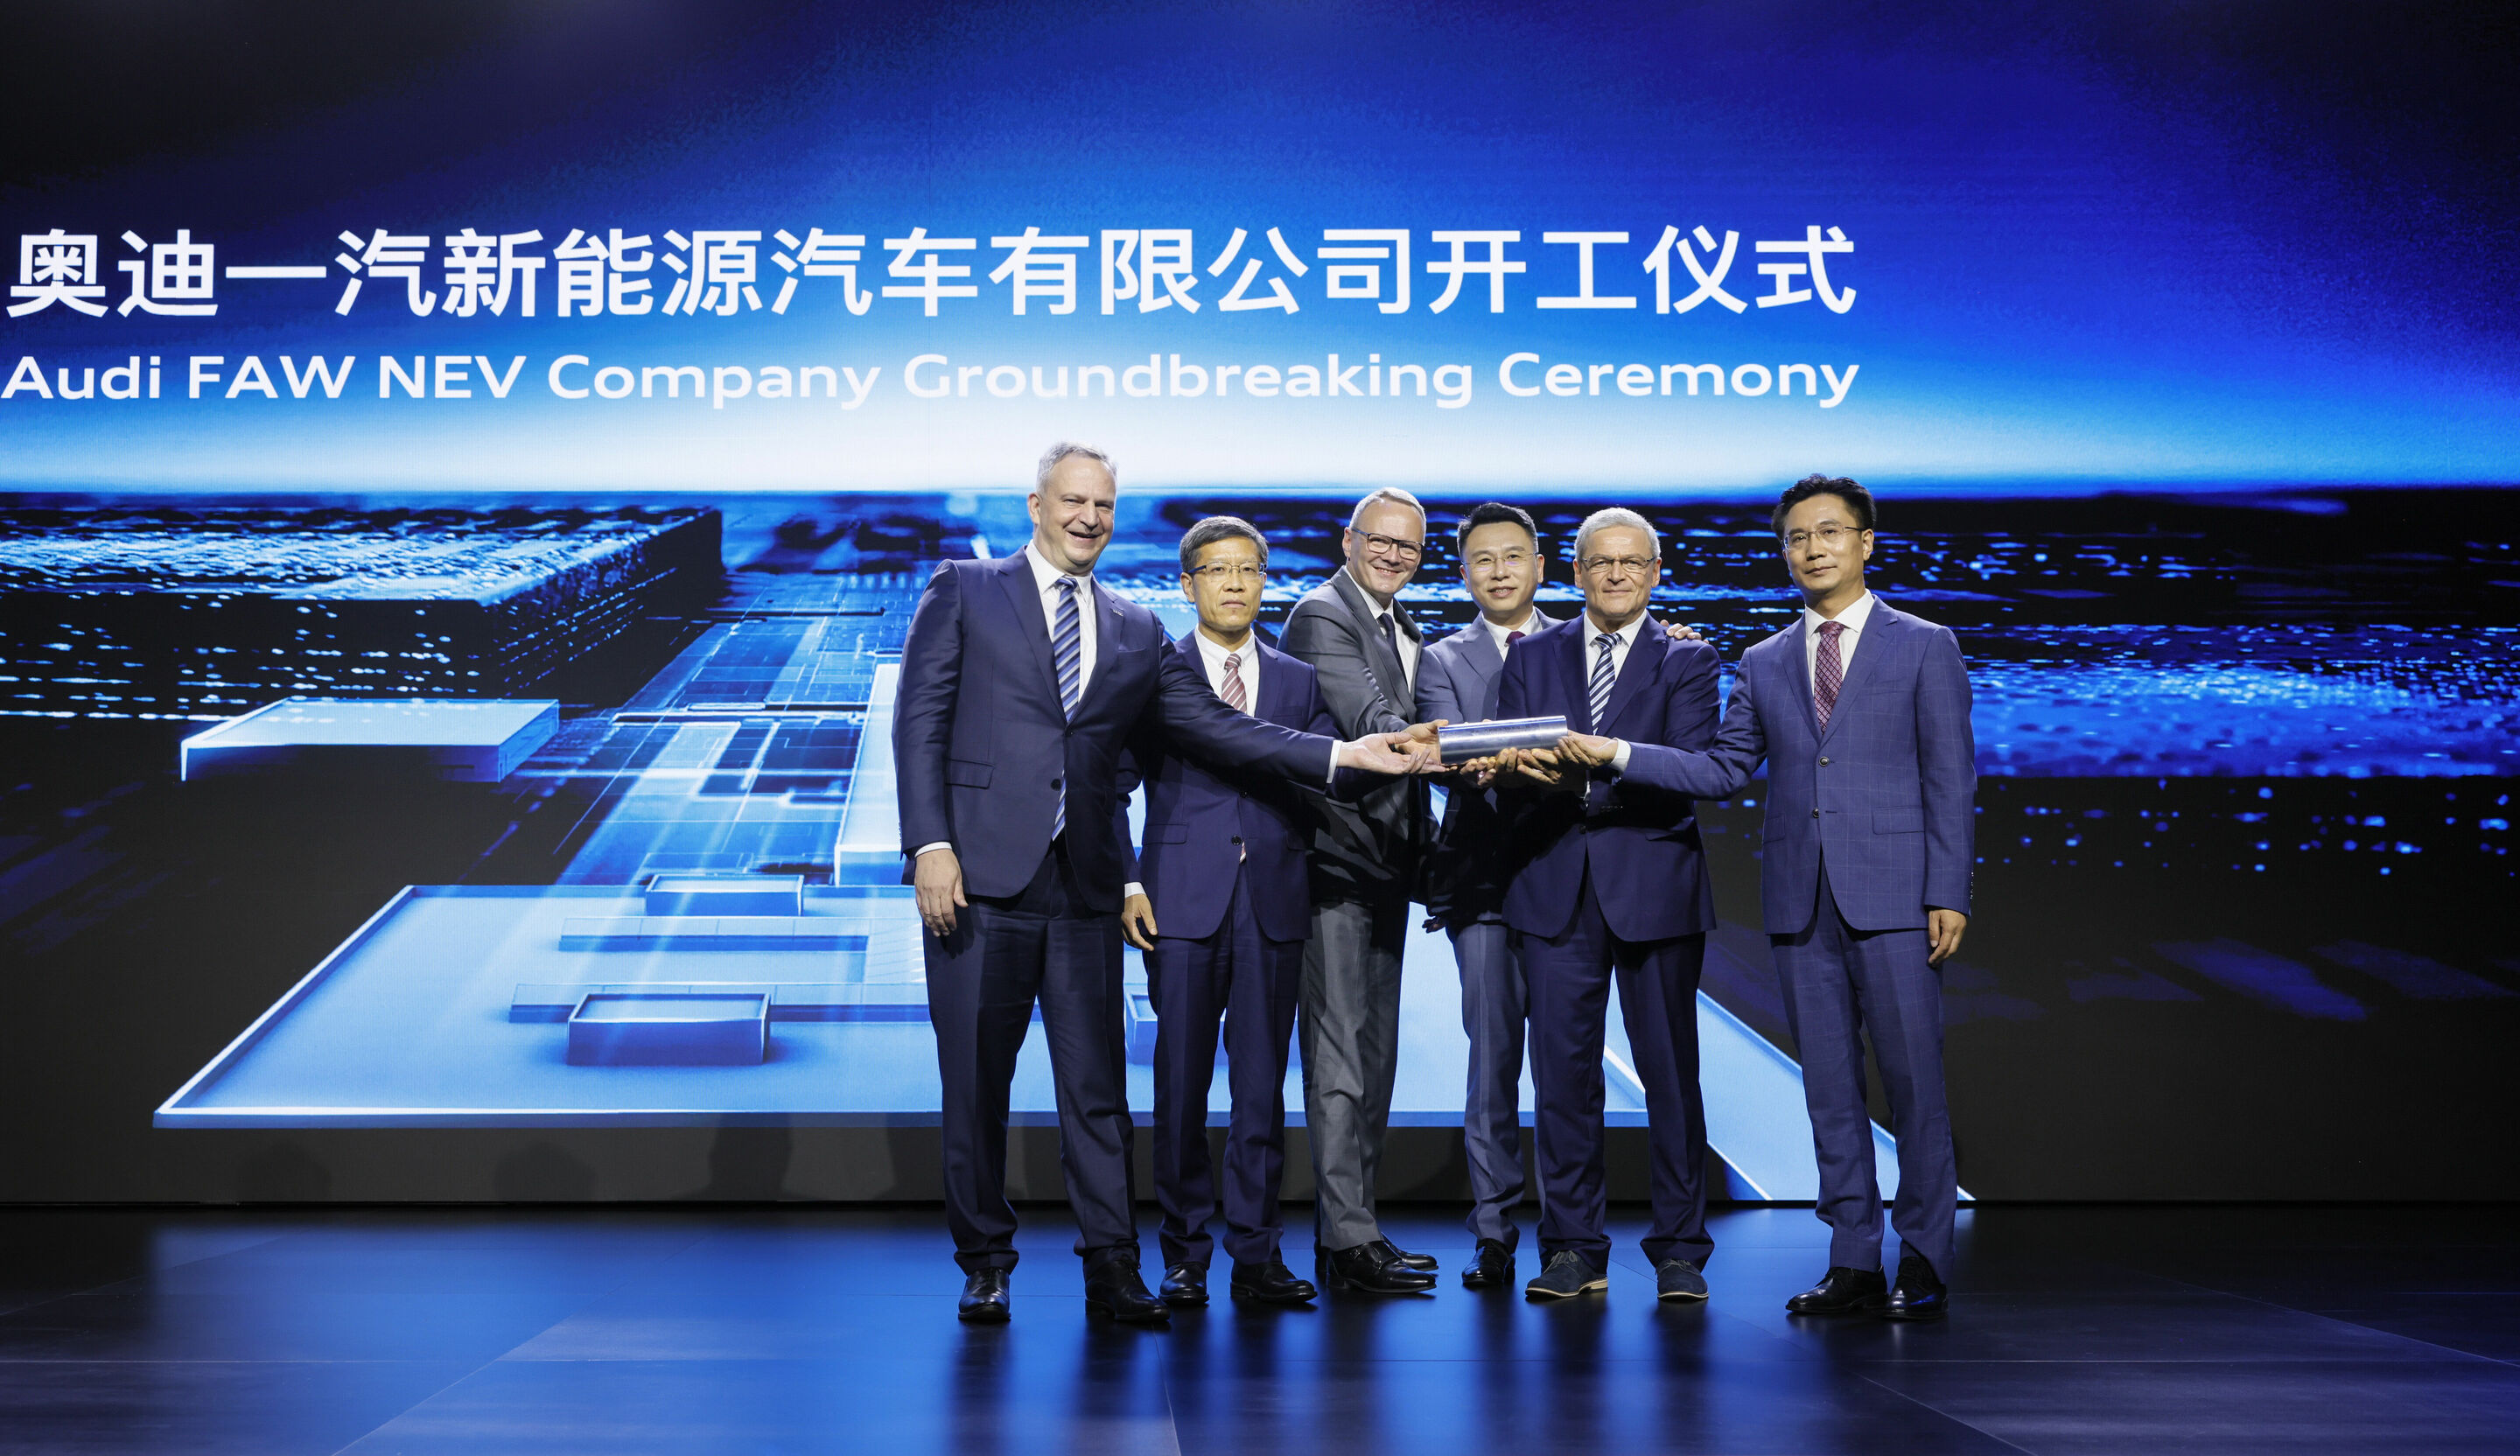 Cornerstone laid in Changchun: Audi FAW NEV Company builds smart factory for e-models